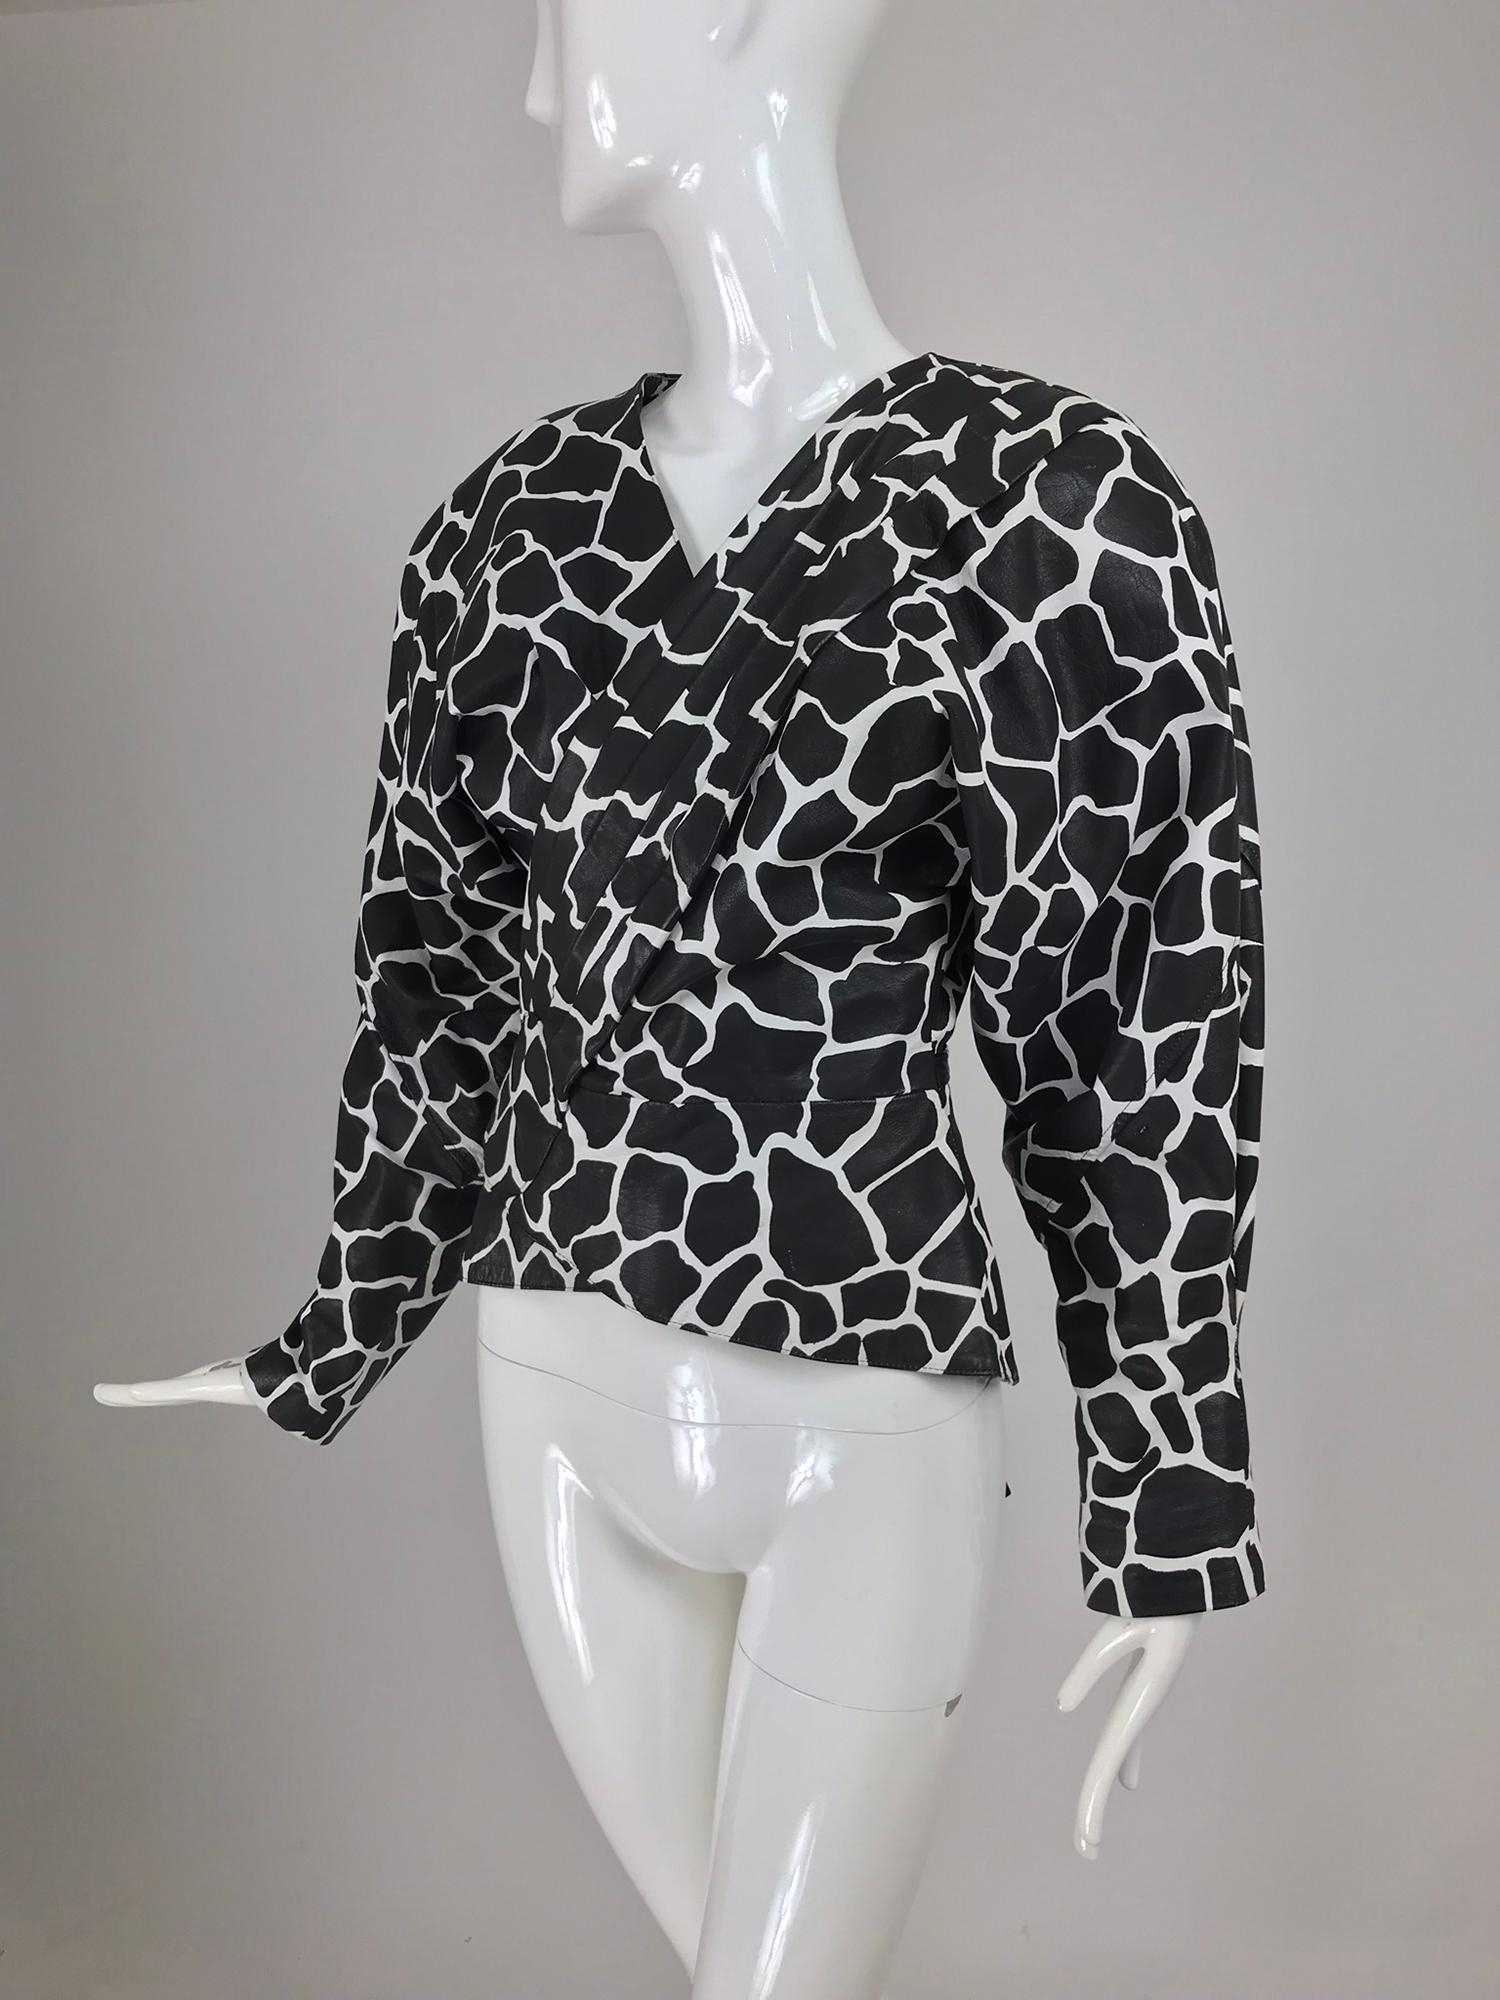 Jean Claude Jitrois black and white leather wrap jacket from the 1980s. Black and white leather in an animal/giraffe print, the jacket wraps at the front and has ties at the waist, with a peplum below. Padded shoulder, dolman sleeves that narrow at